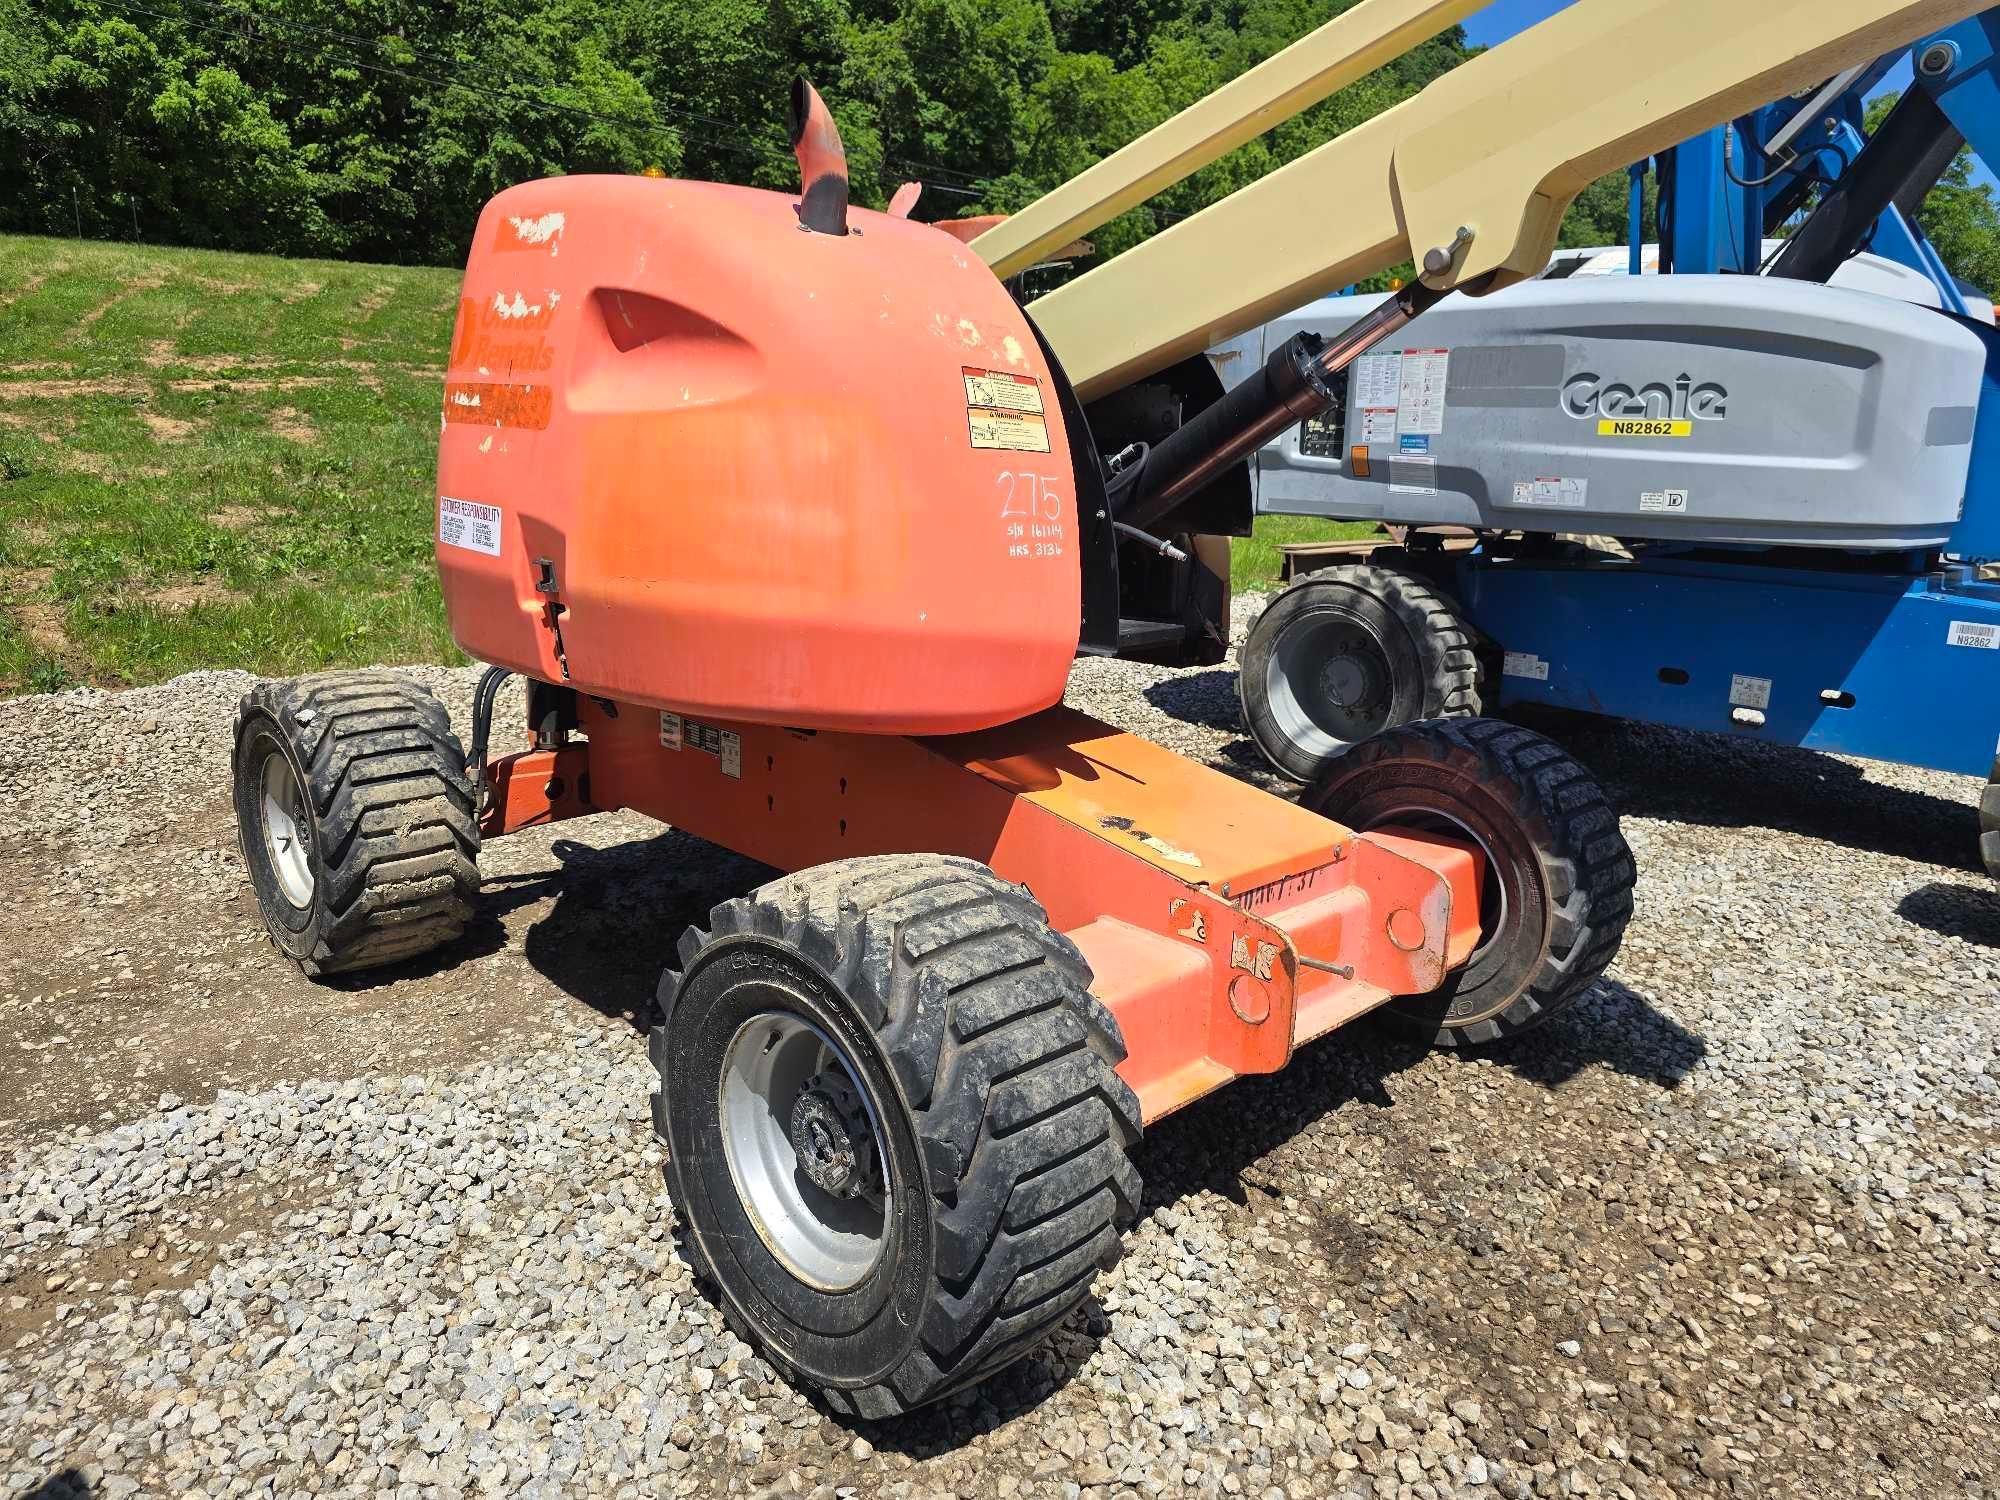 2012 JLG 450AJ BOOM LIFT SN:300161114 4x4, powered by diesel engine, equipped with 45ft. Platform